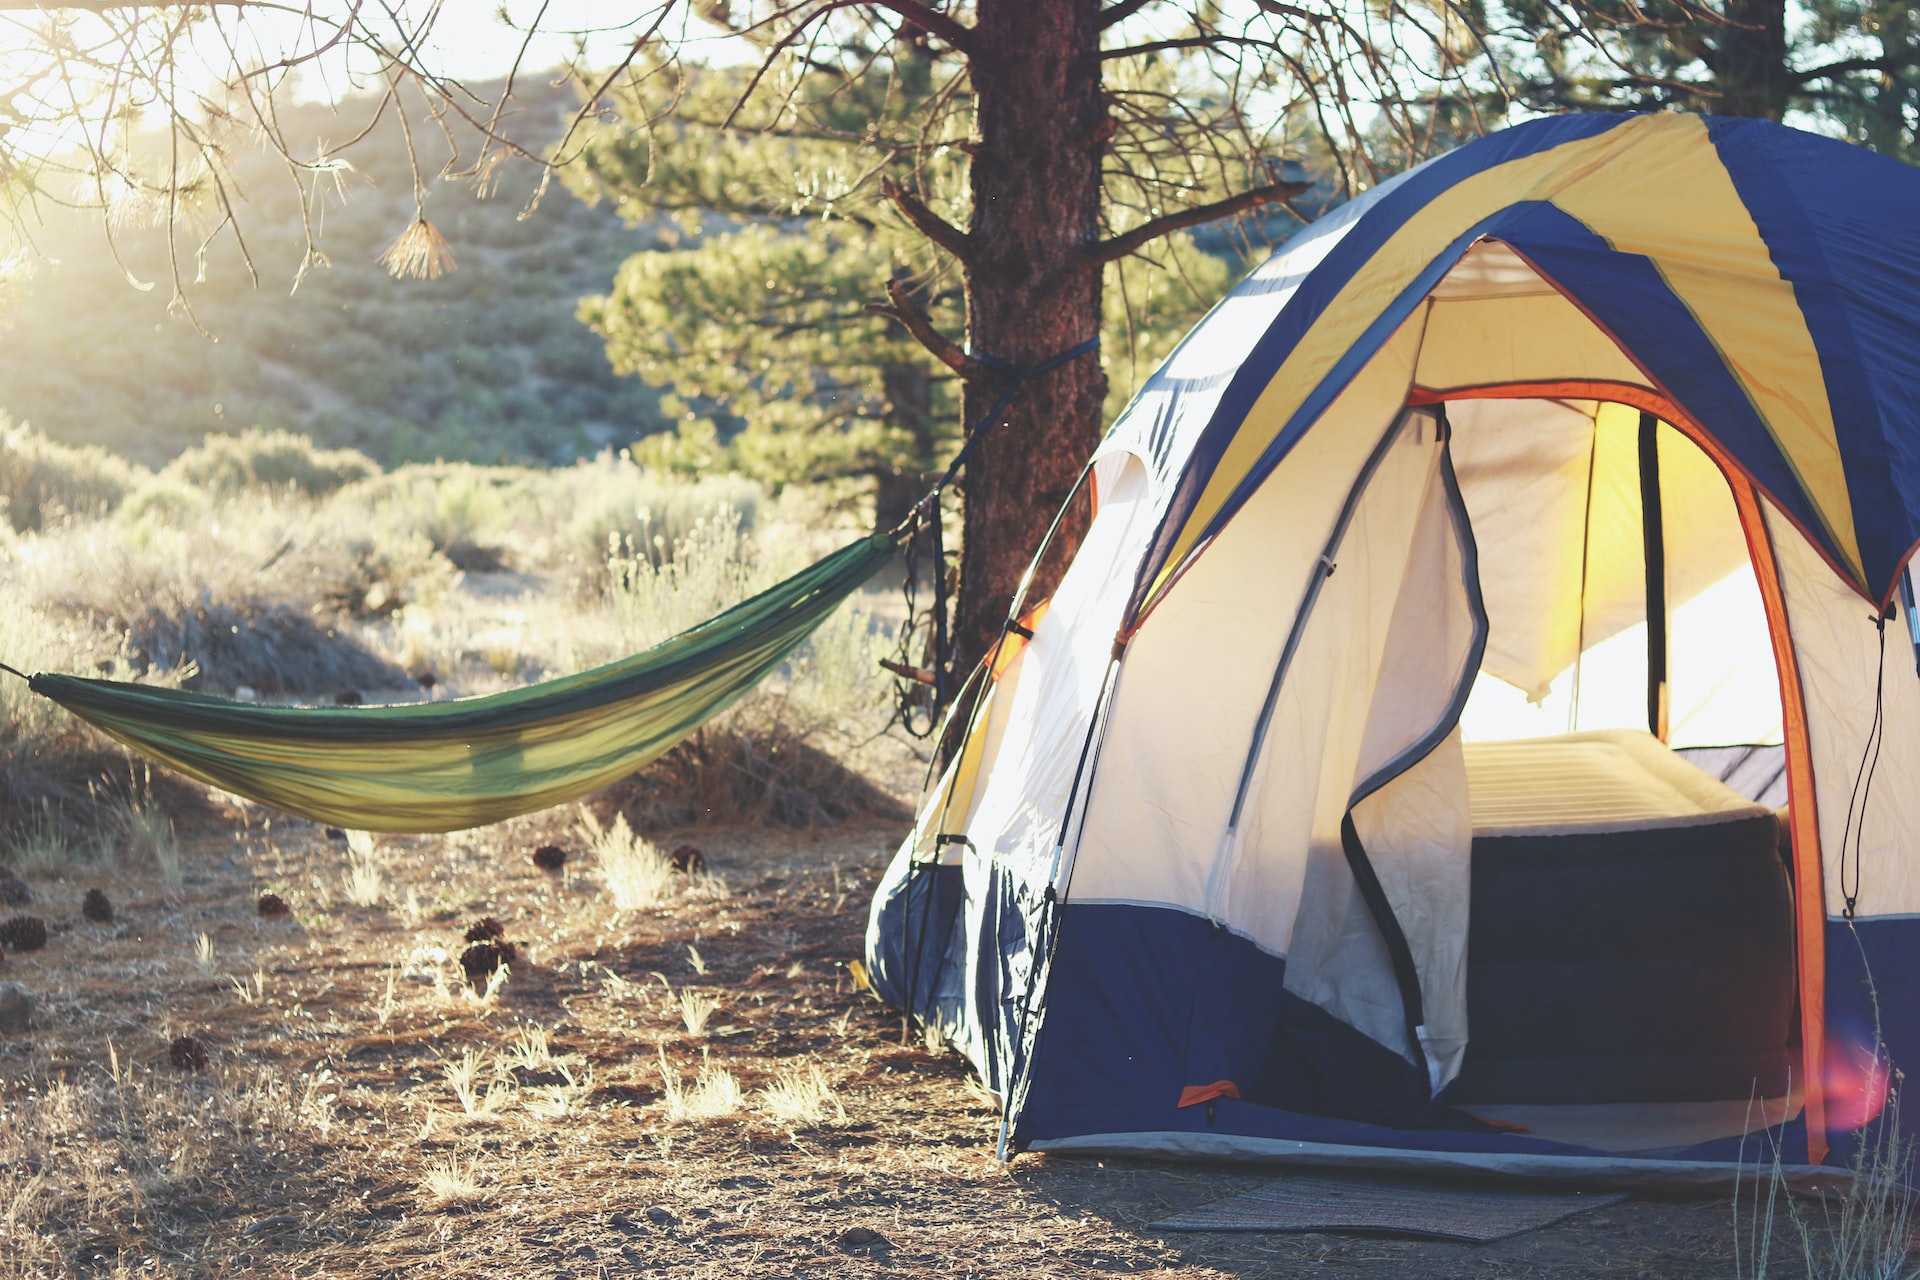 The Best Waterproof Camping Tent – Features, Benefits & Much More